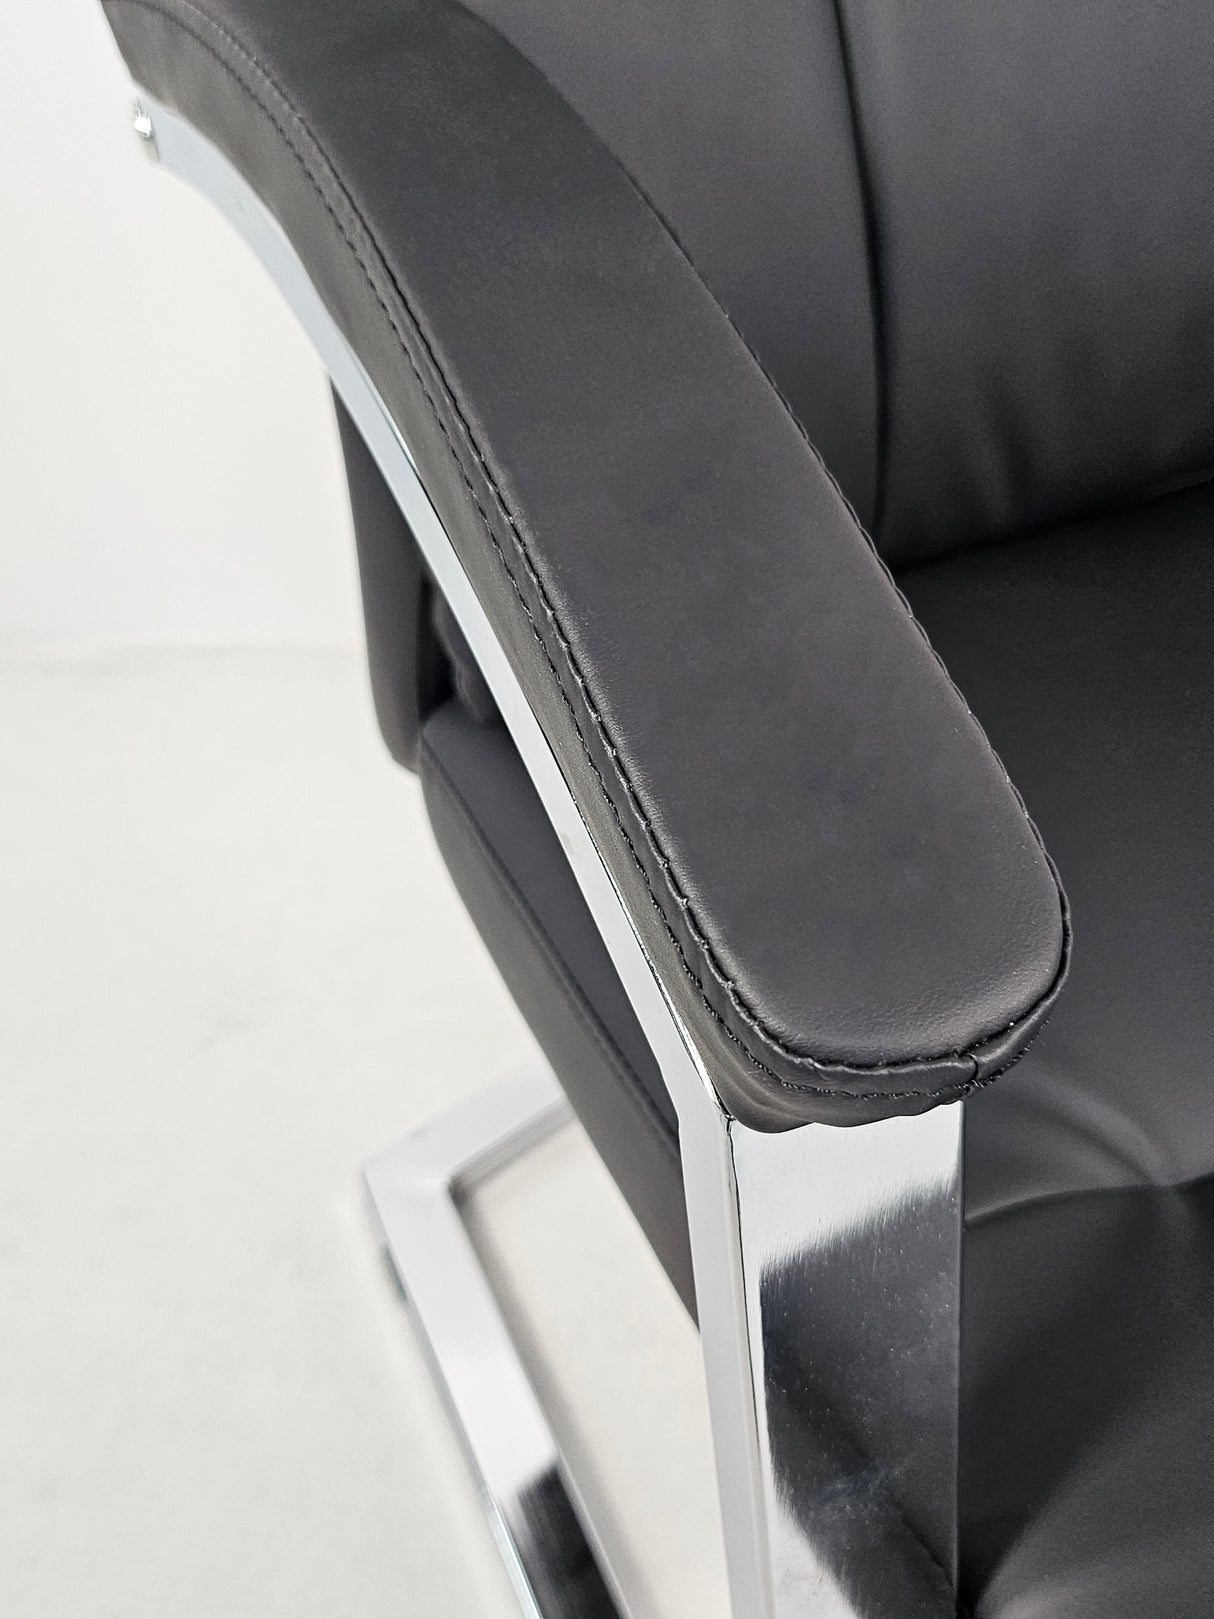 Modern Chrome and Black Leather Executive Visitor Chair - FE-202